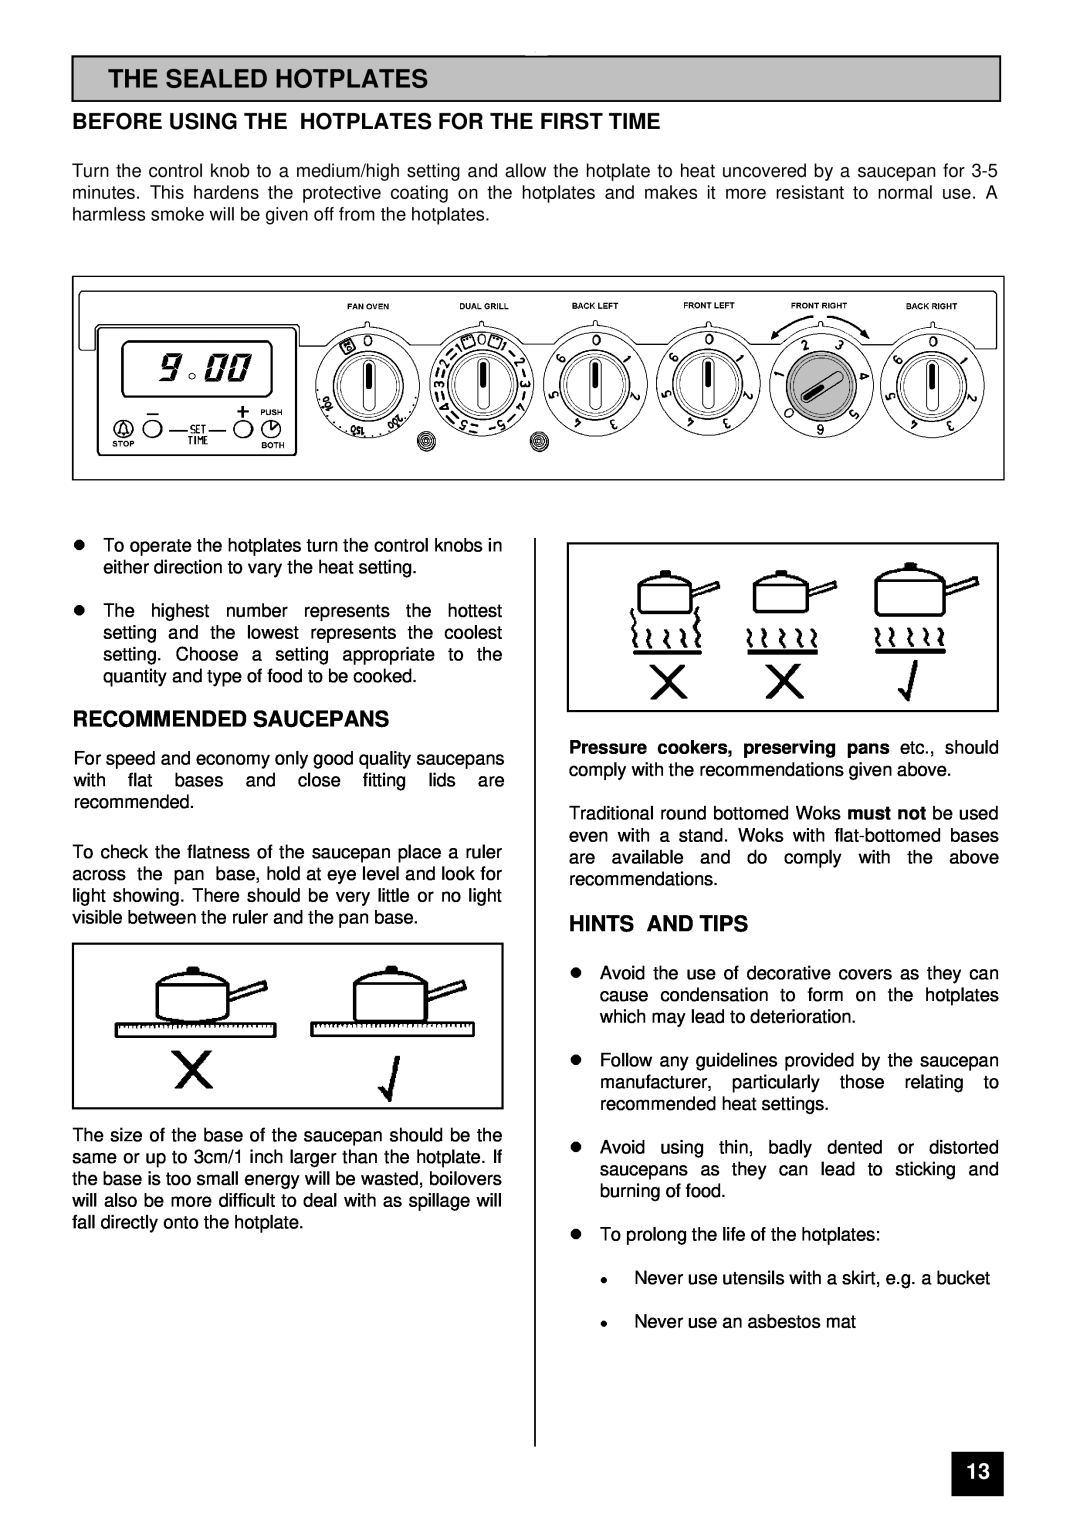 Zanussi ZCE 7300 manual The Sealed Hotplates, Before Using The Hotplates For The First Time, Recommended Saucepans 